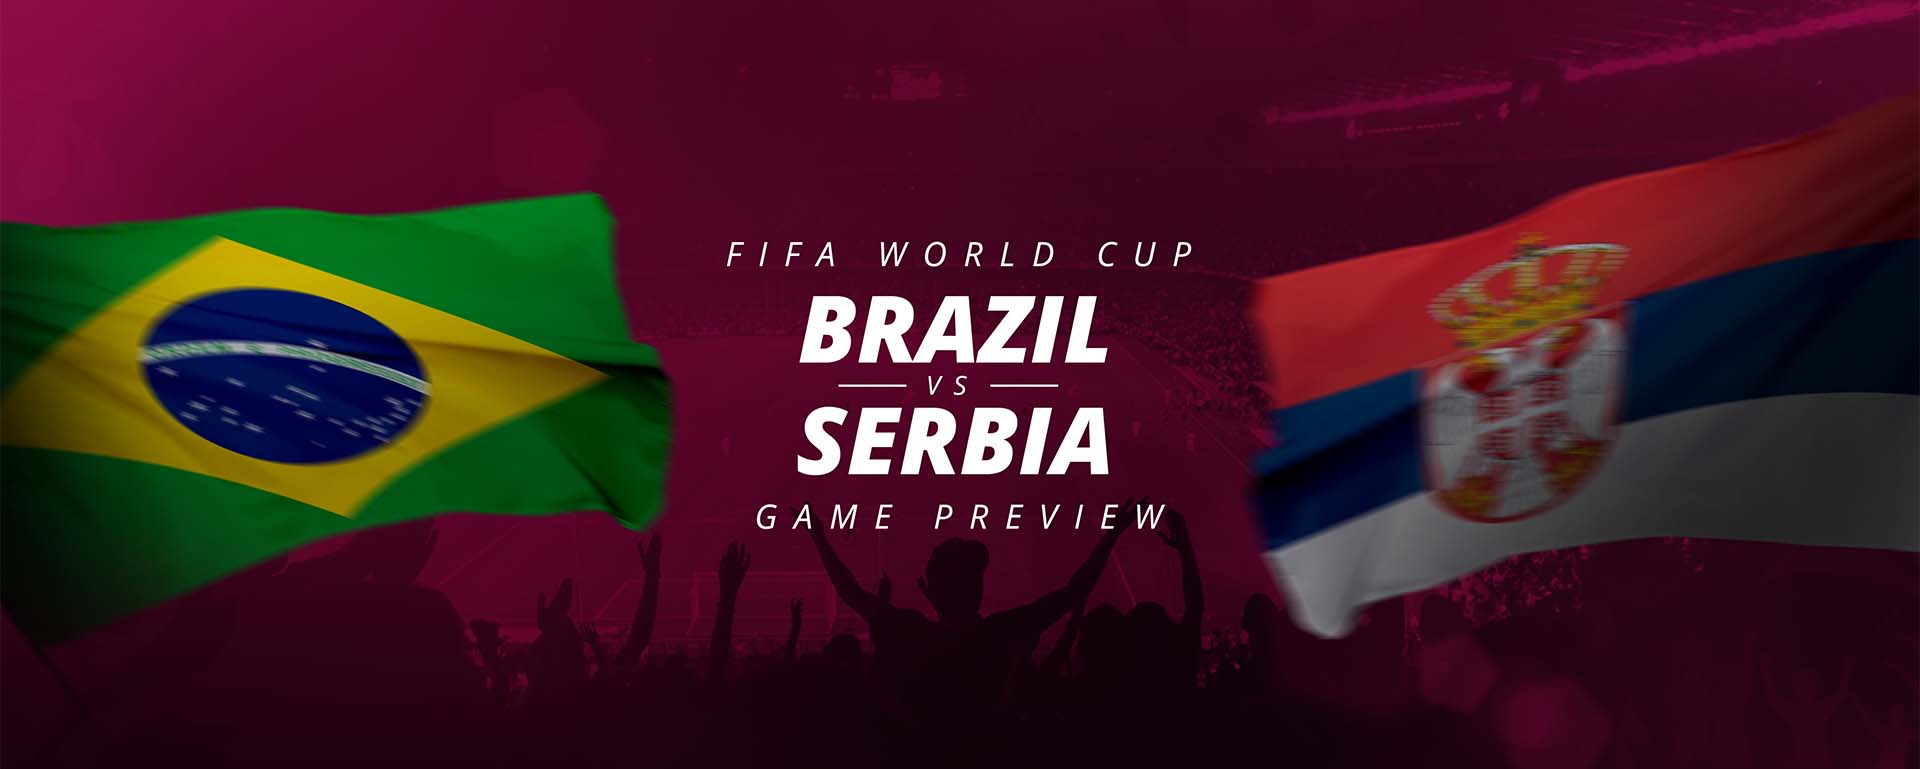 FIFA WORLD CUP: BRAZIL V SERBIA – GAME PREVIEW